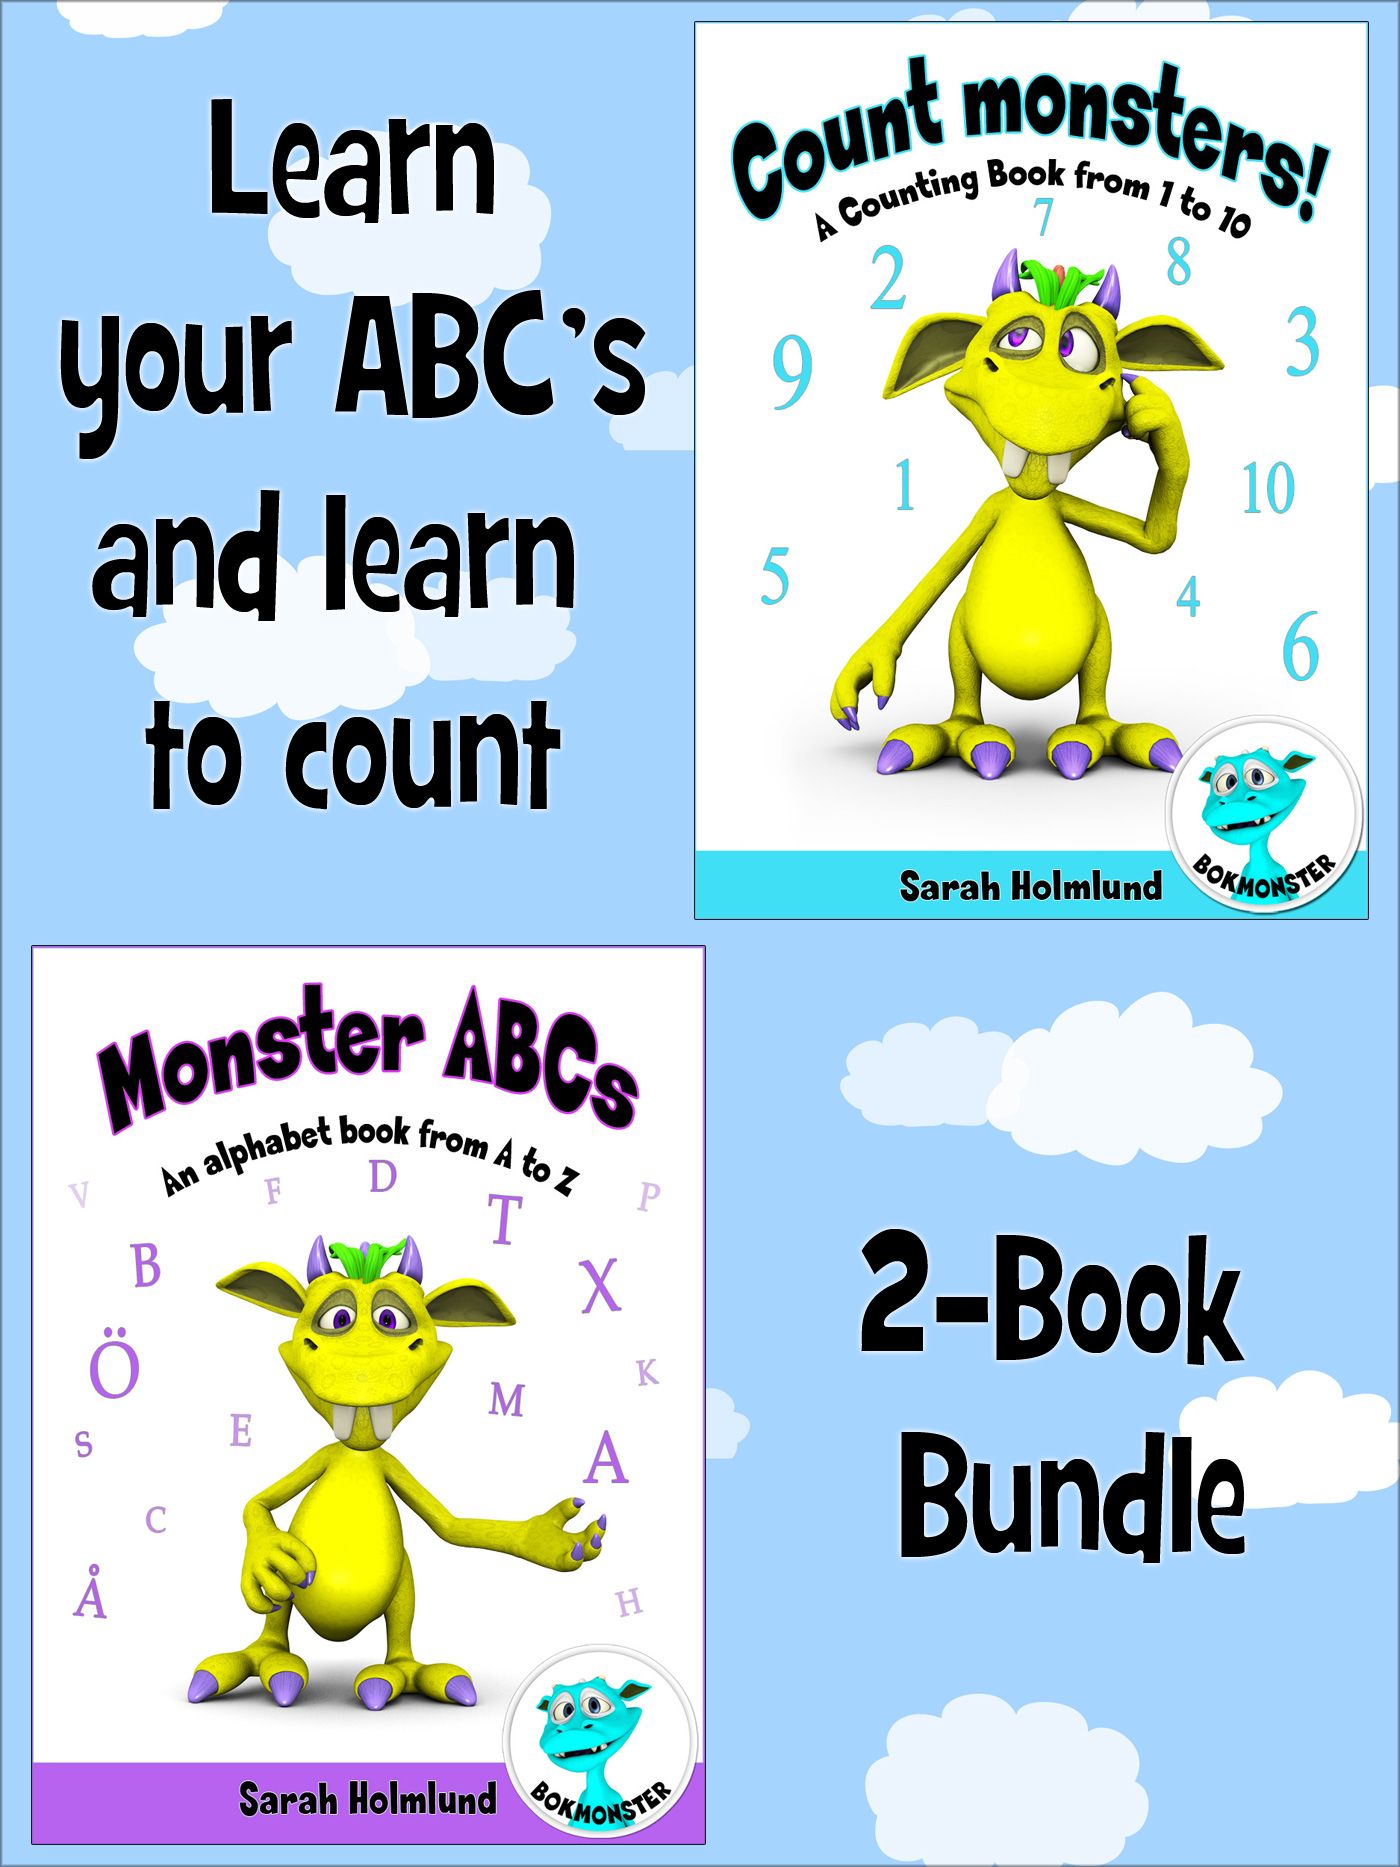 Learn your ABC's and learn to count - 2-Book Bundle, e-bok av Sarah Holmlund